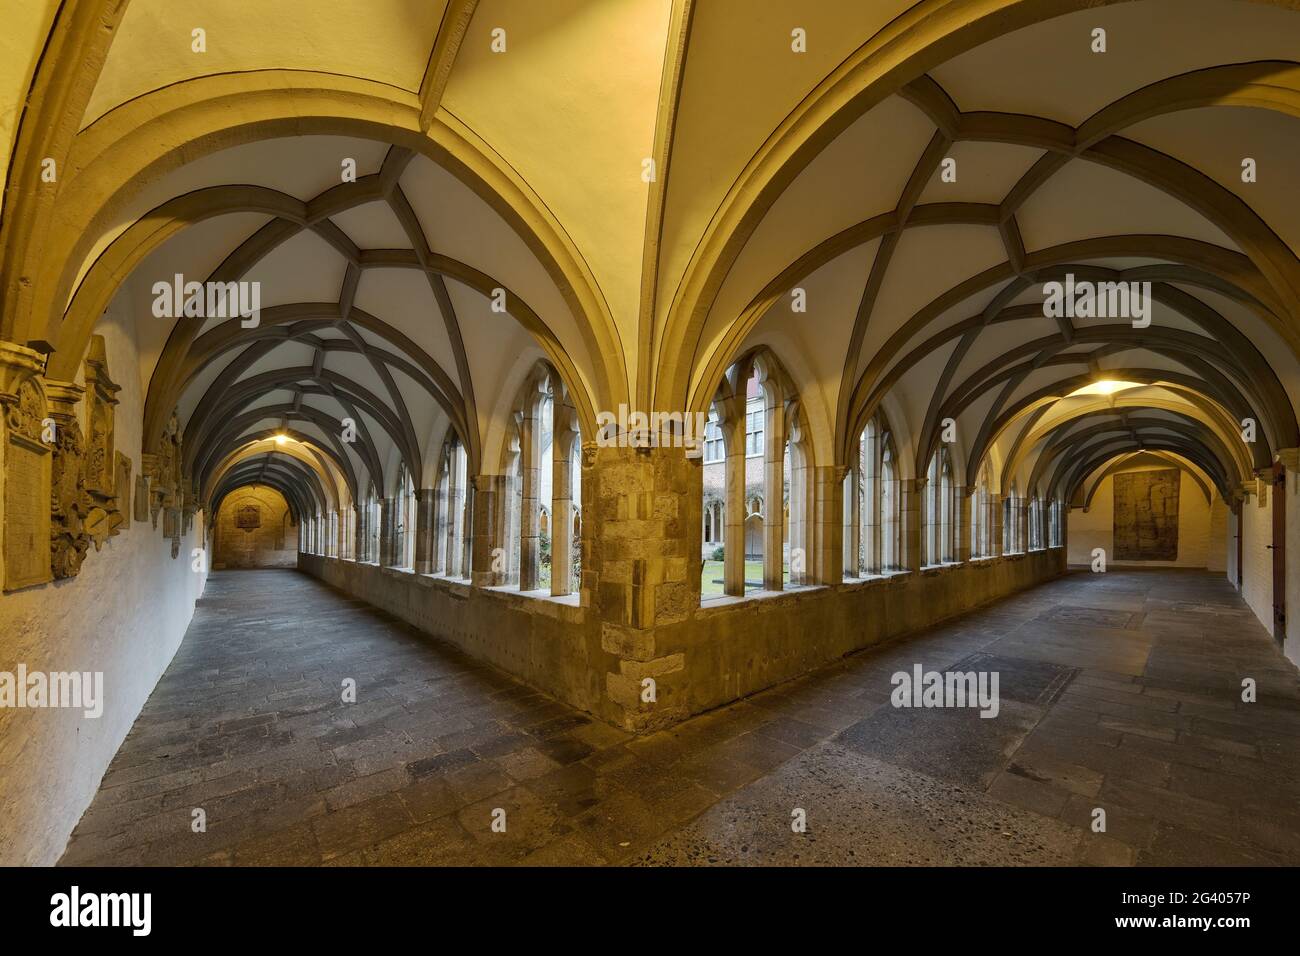 Illuminated cloister in the evening, St. Viktor Cathedral, Xanten, Lower Rhine, Germany, Europe Stock Photo